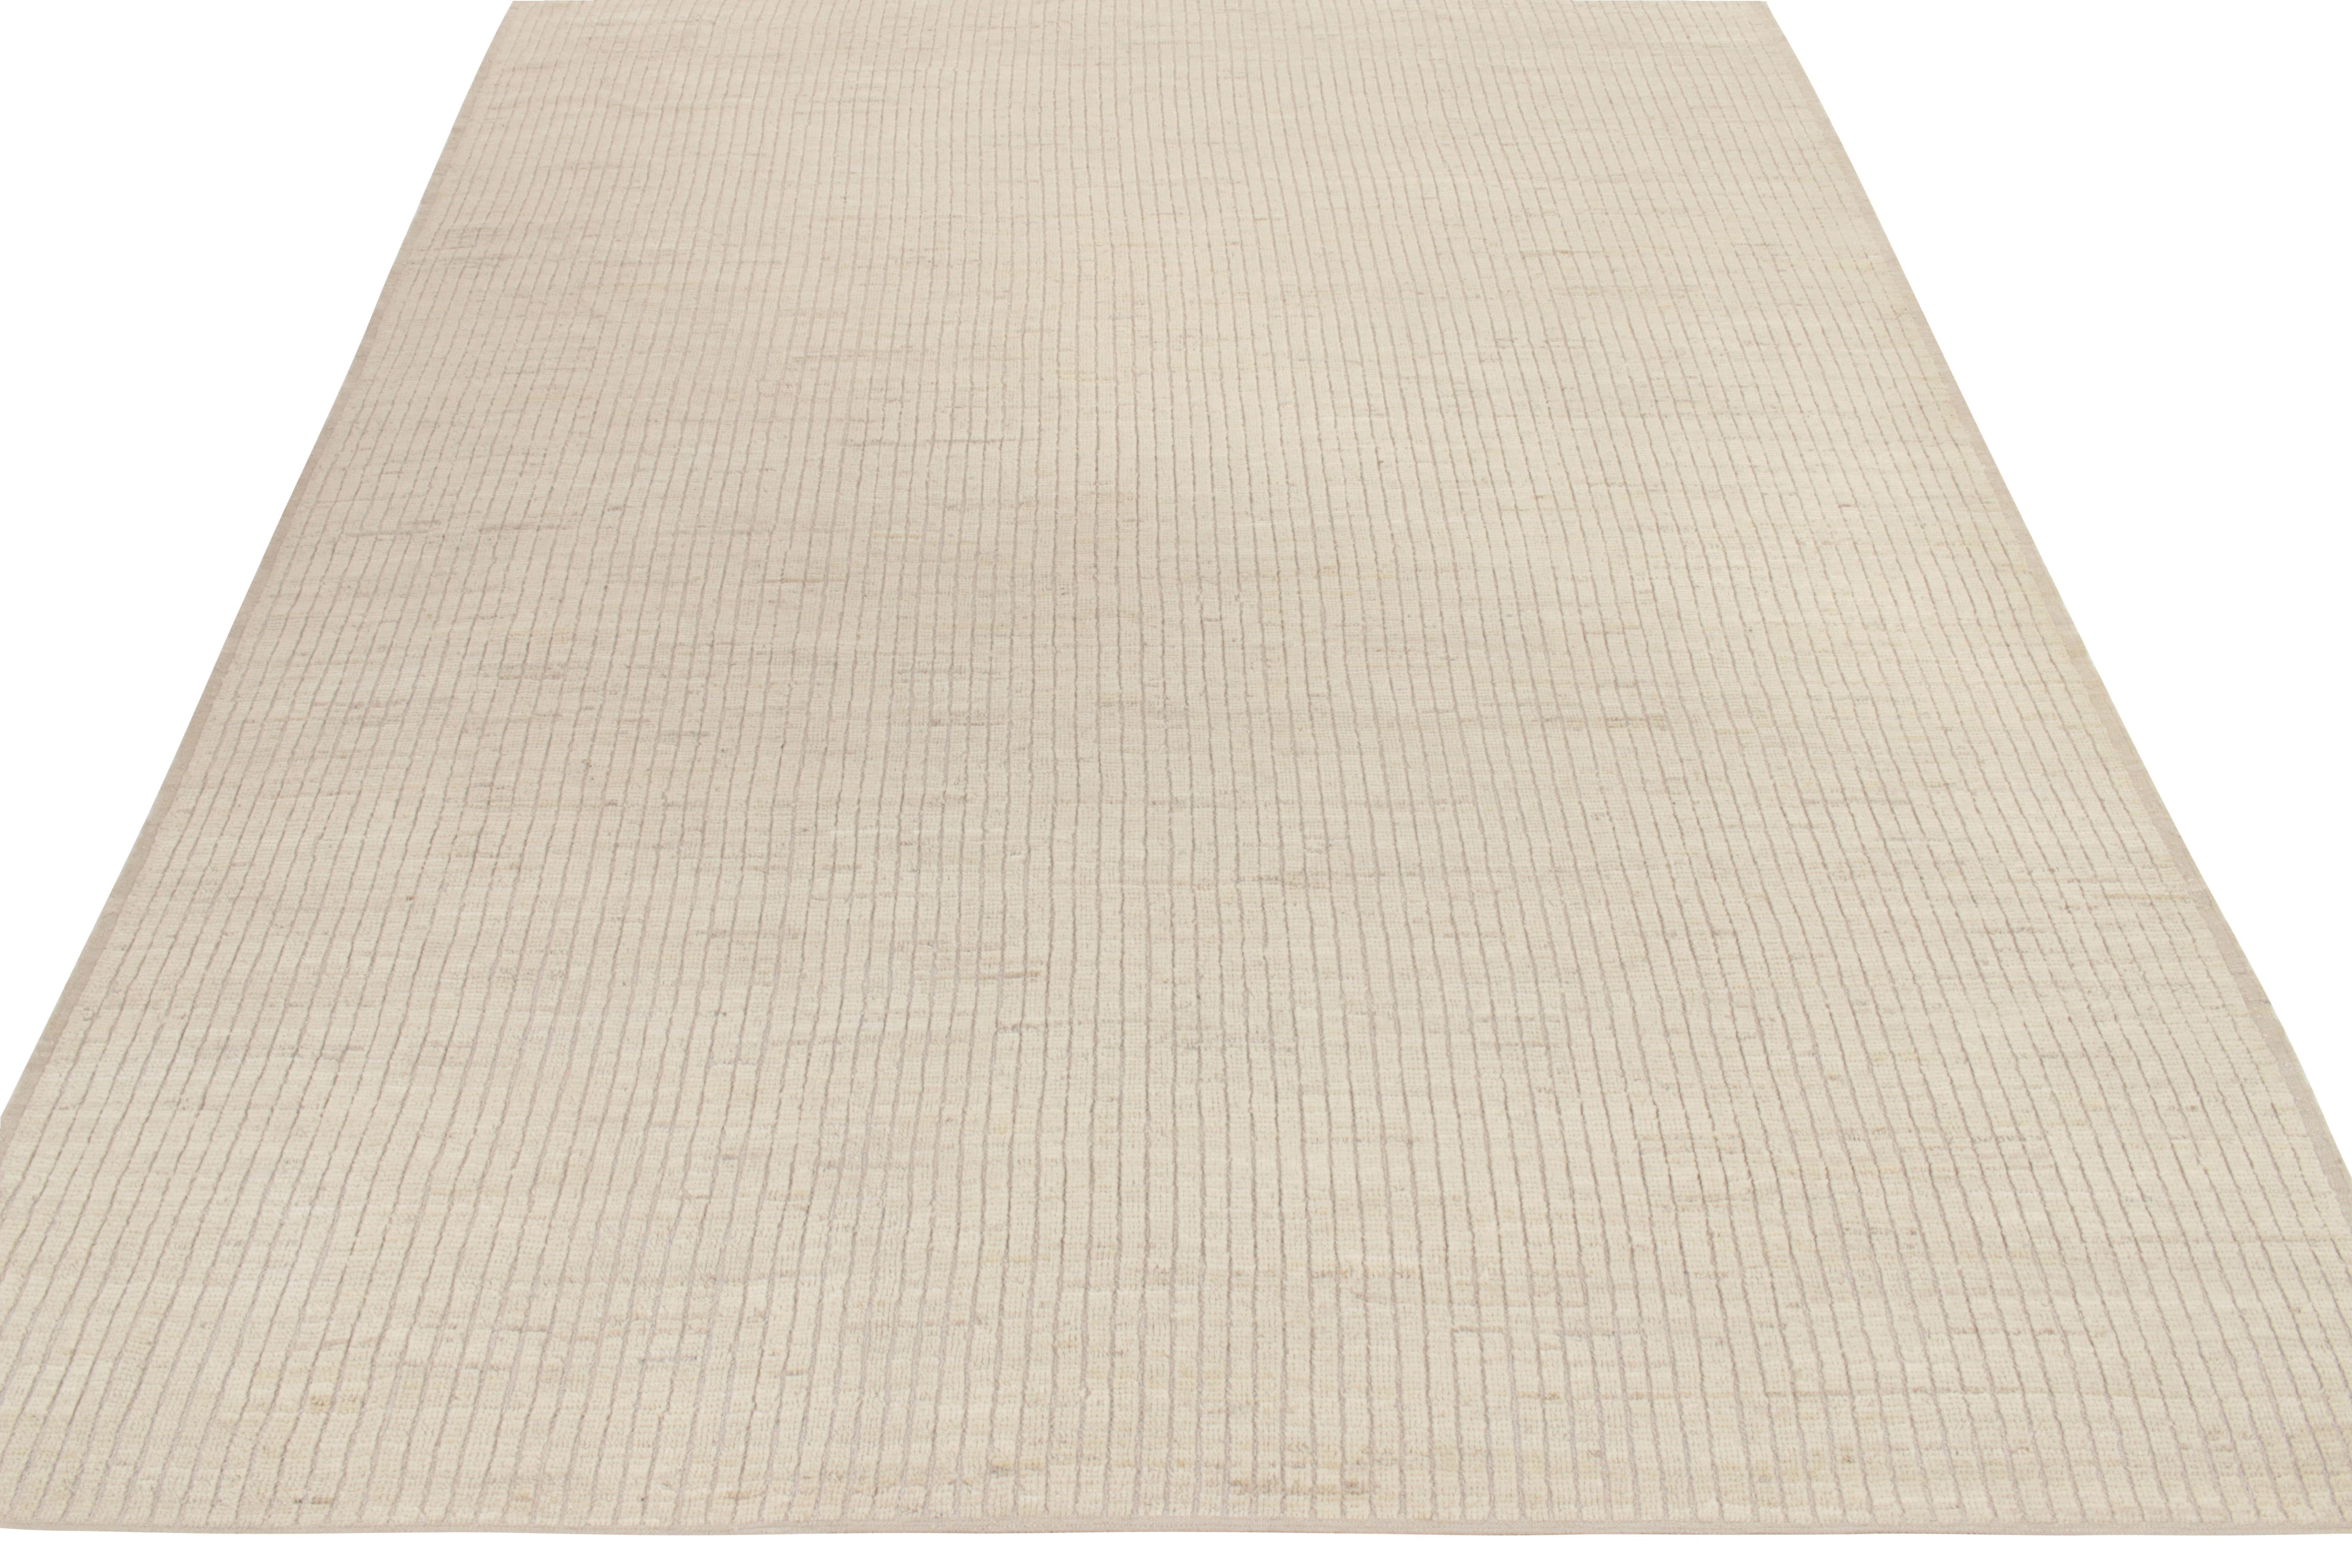 Hand-knotted in wool, a 9 x 12 rug from our New & Modern Collection featuring a union of pile & flatwoven sensibilities, uniquely transitioning as a high low texture relishing subtle colorway gradient in beige and off white tones. Overall a